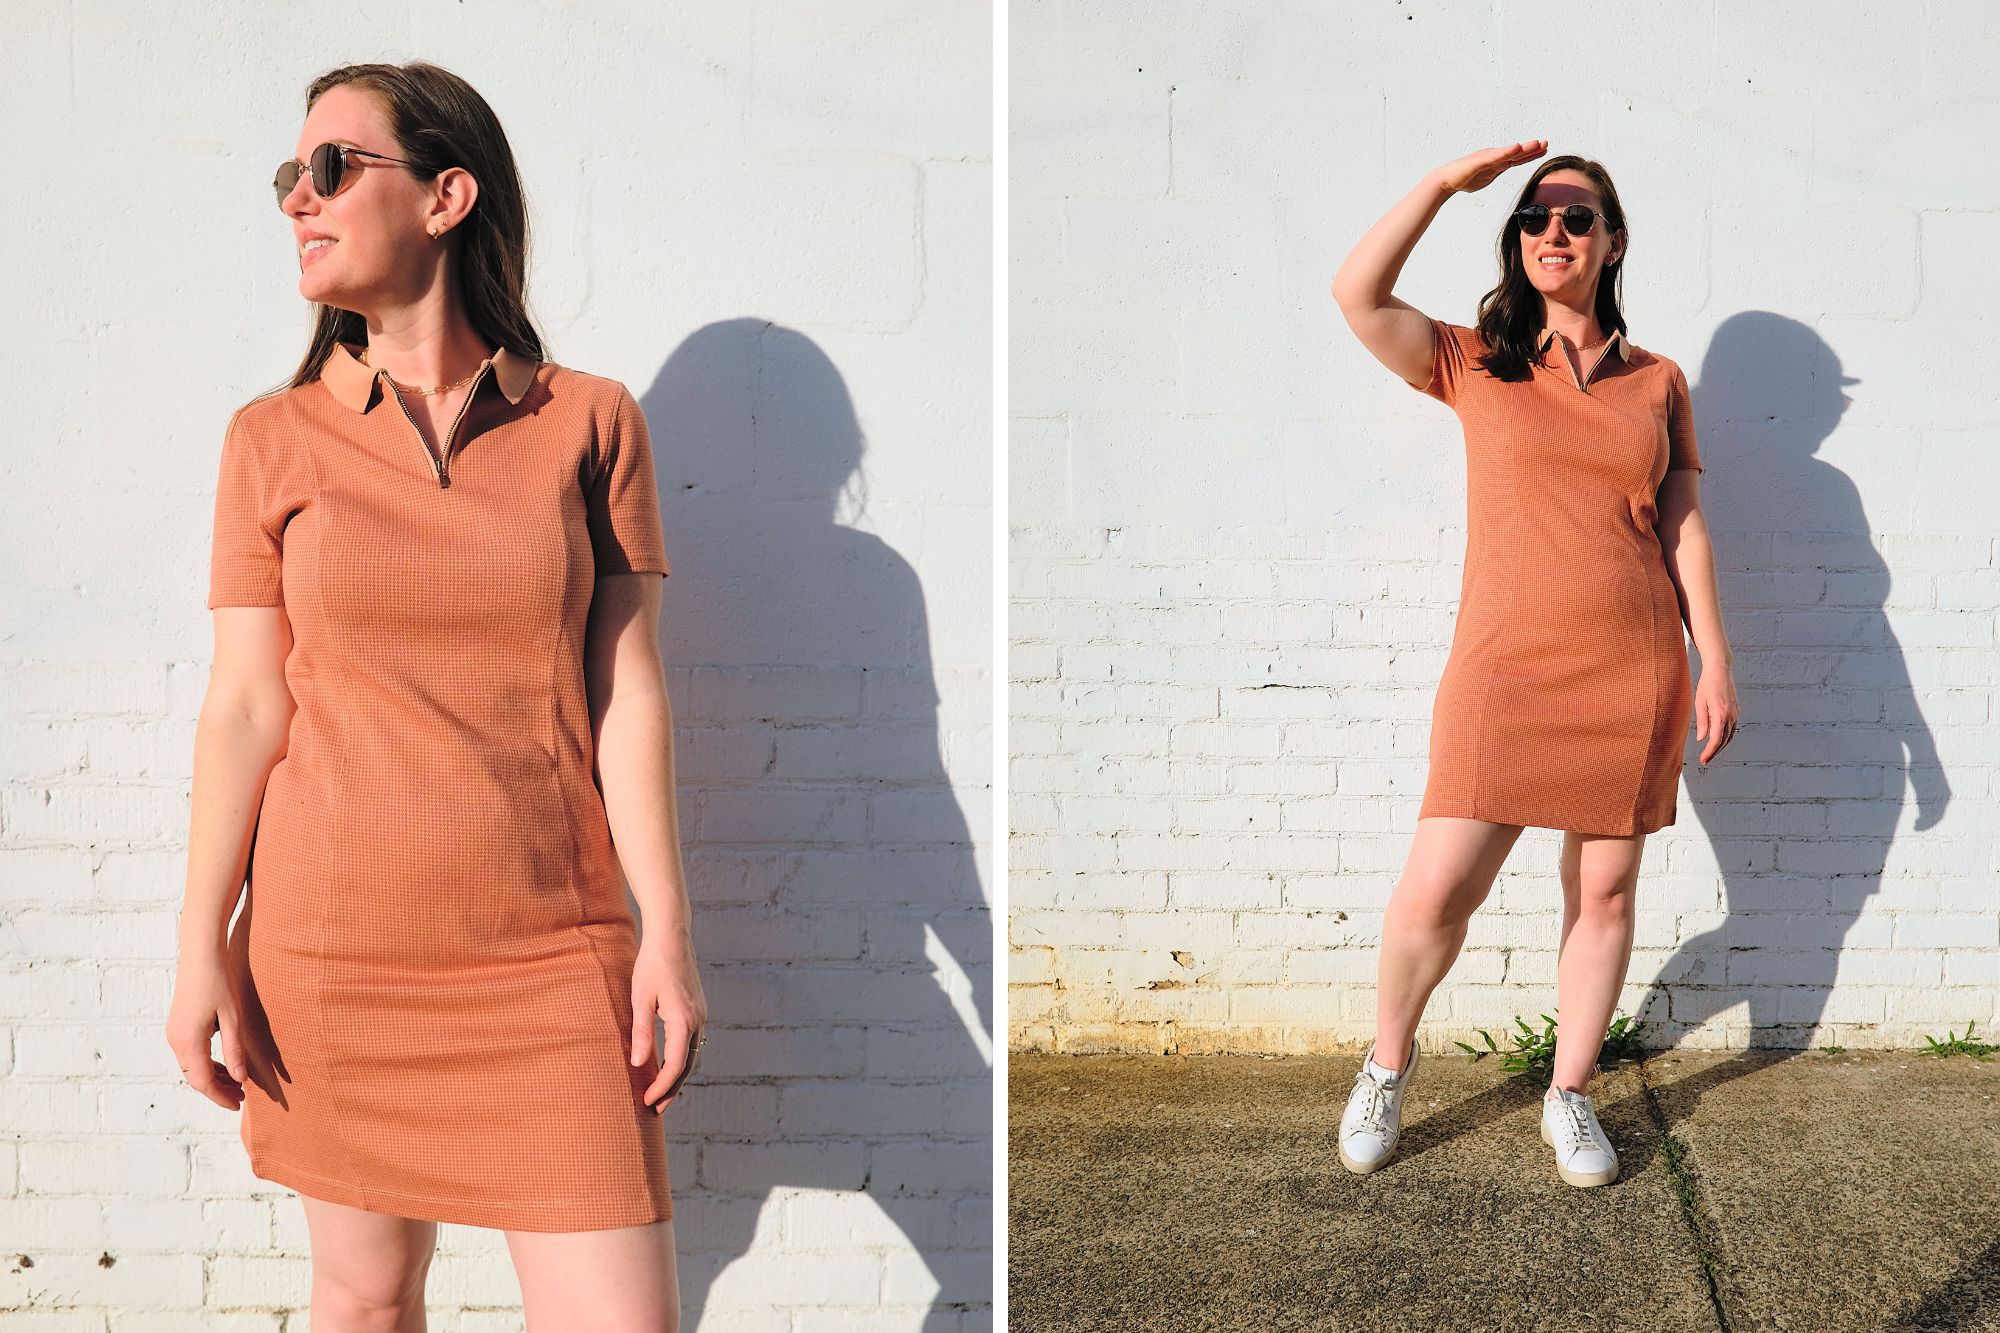 Alyssa wears the Jules Tennis Dress from ABLE in two photos